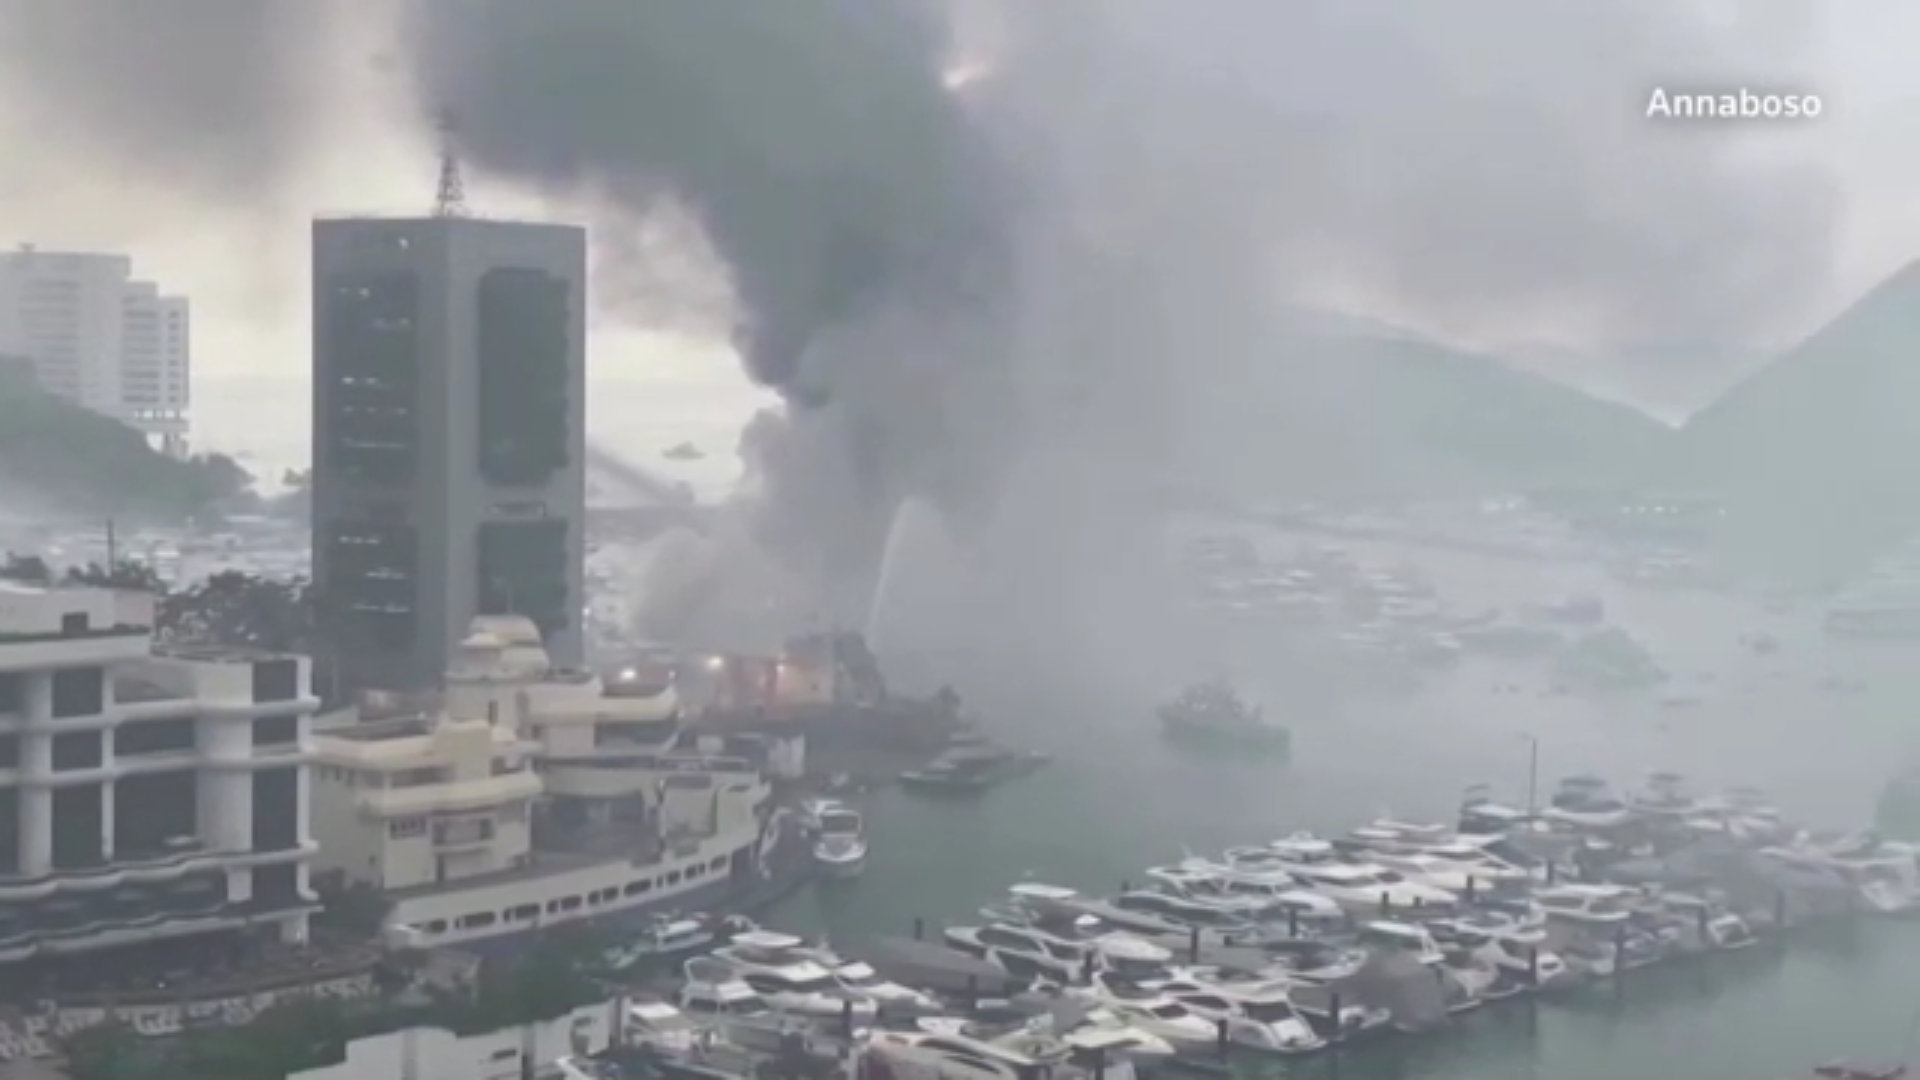 Fire Sets 16 Boats Ablaze in Hong Kong, at Least 10 Sink